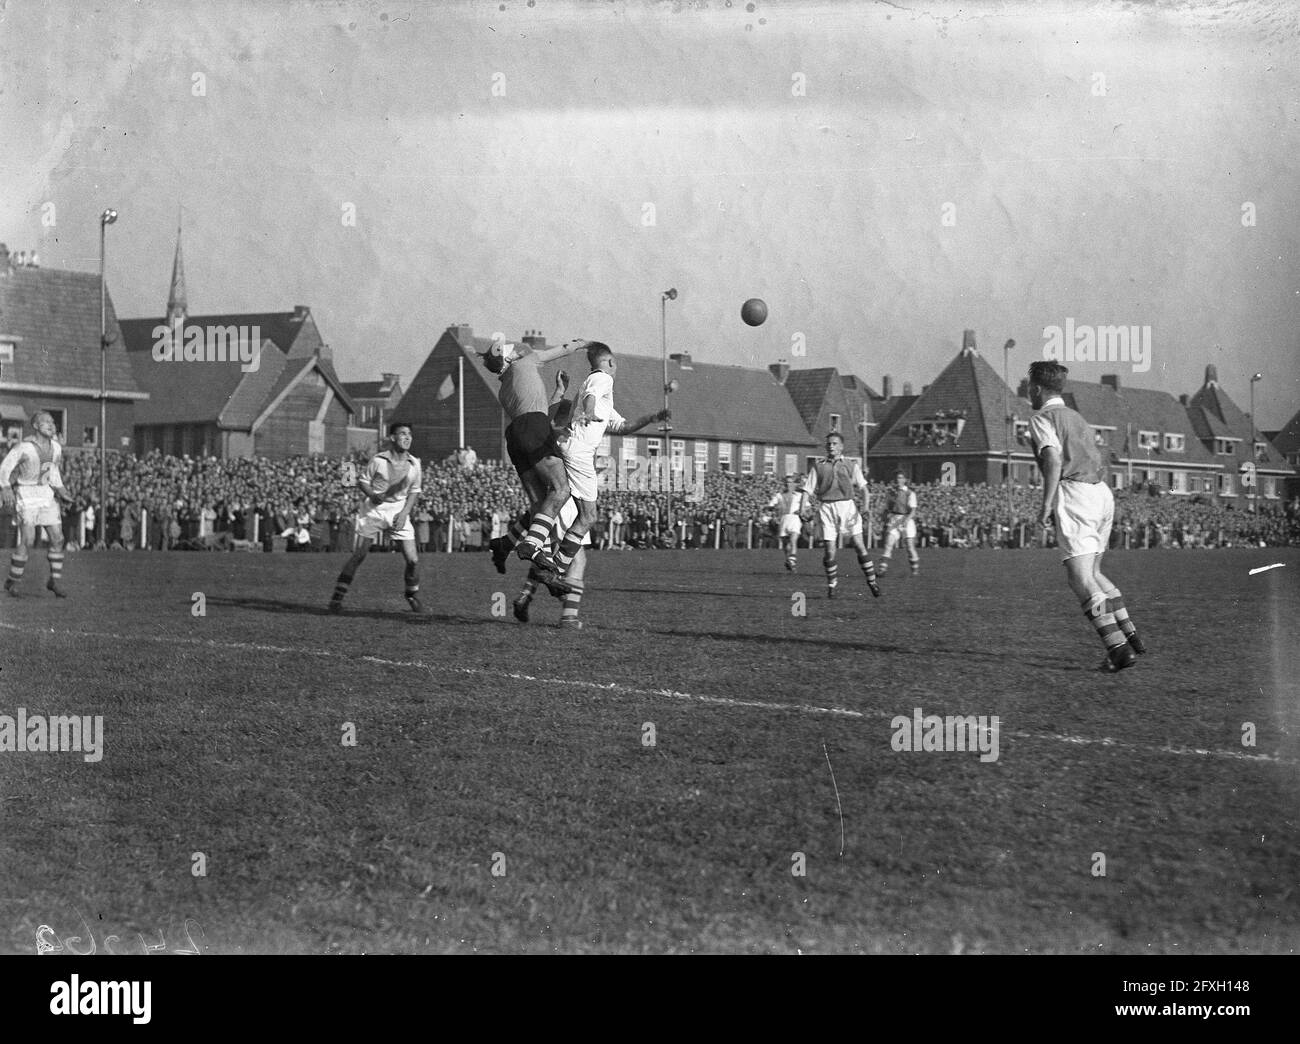 Soccer match The Volewijckers-Ajax (1-0) at the Mosveld in Amsterdam North. Goalkeeper Hagenaars (Volewijckers) punches ball away, October 10, 1947, sports, soccer, matches, The Netherlands, 20th century press agency photo, news to remember, documentary, historic photography 1945-1990, visual stories, human history of the Twentieth Century, capturing moments in time Stock Photo